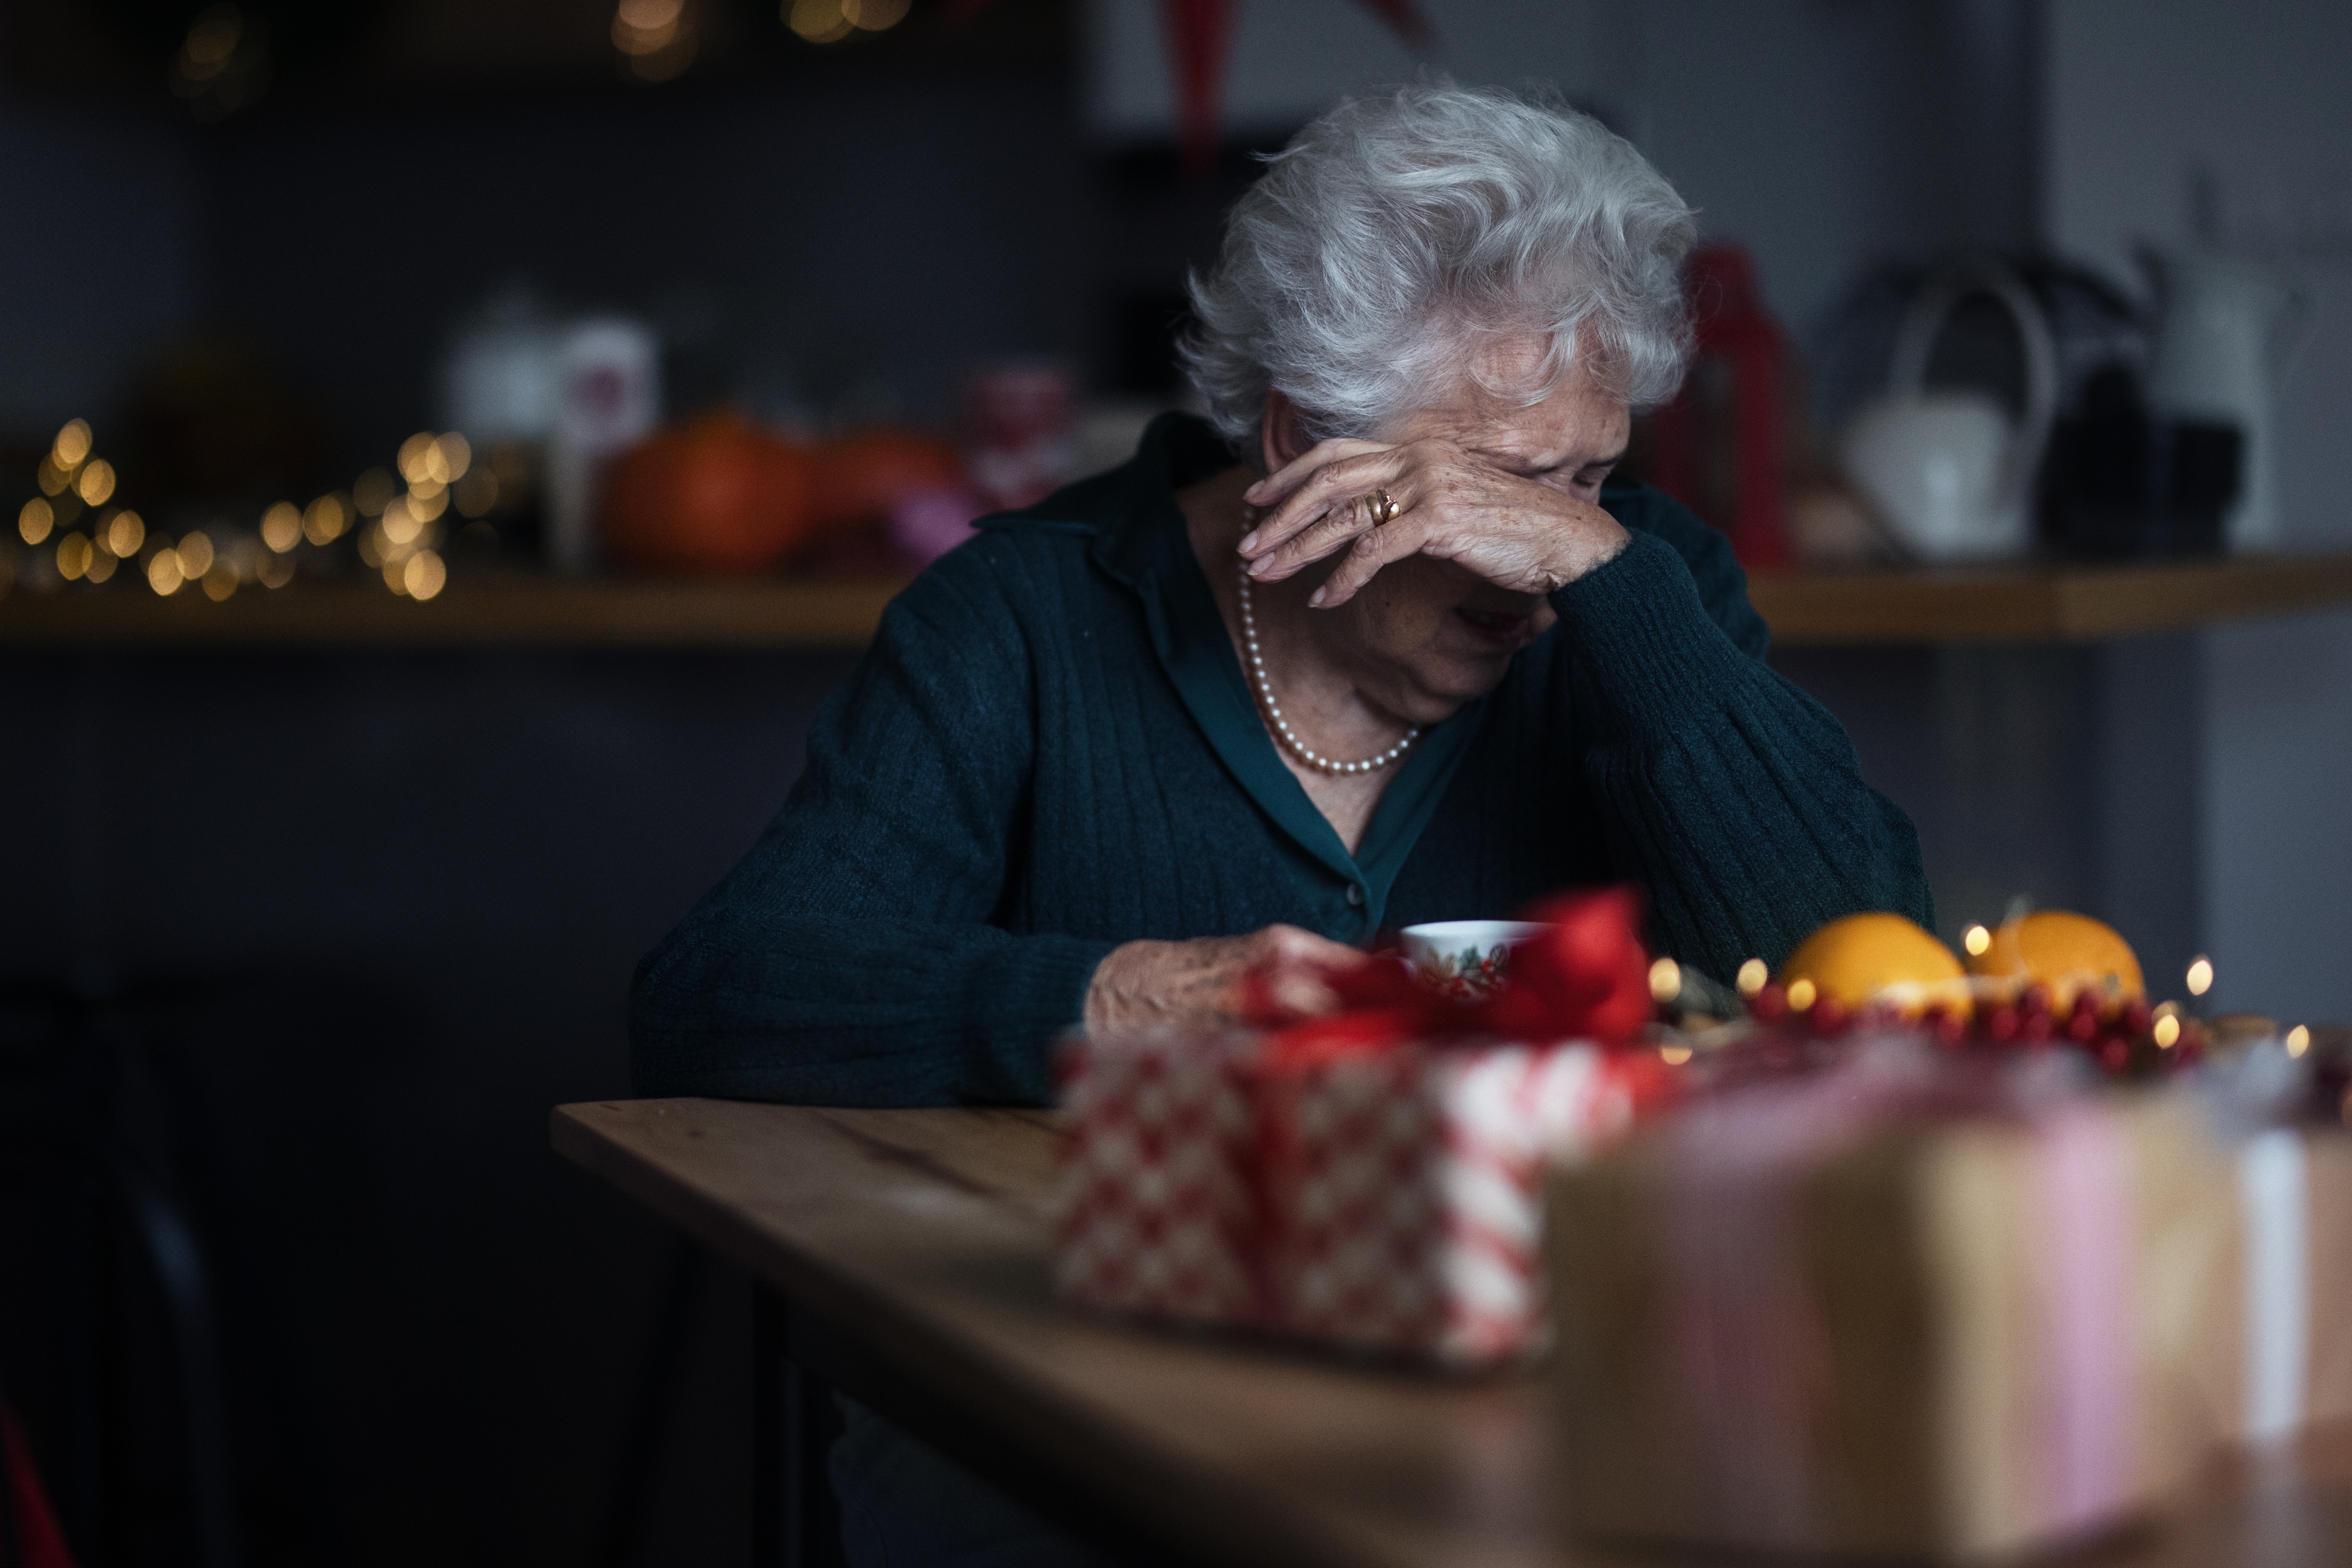 An unhappy senior woman sitting alone and crying | Source: Shutterstock